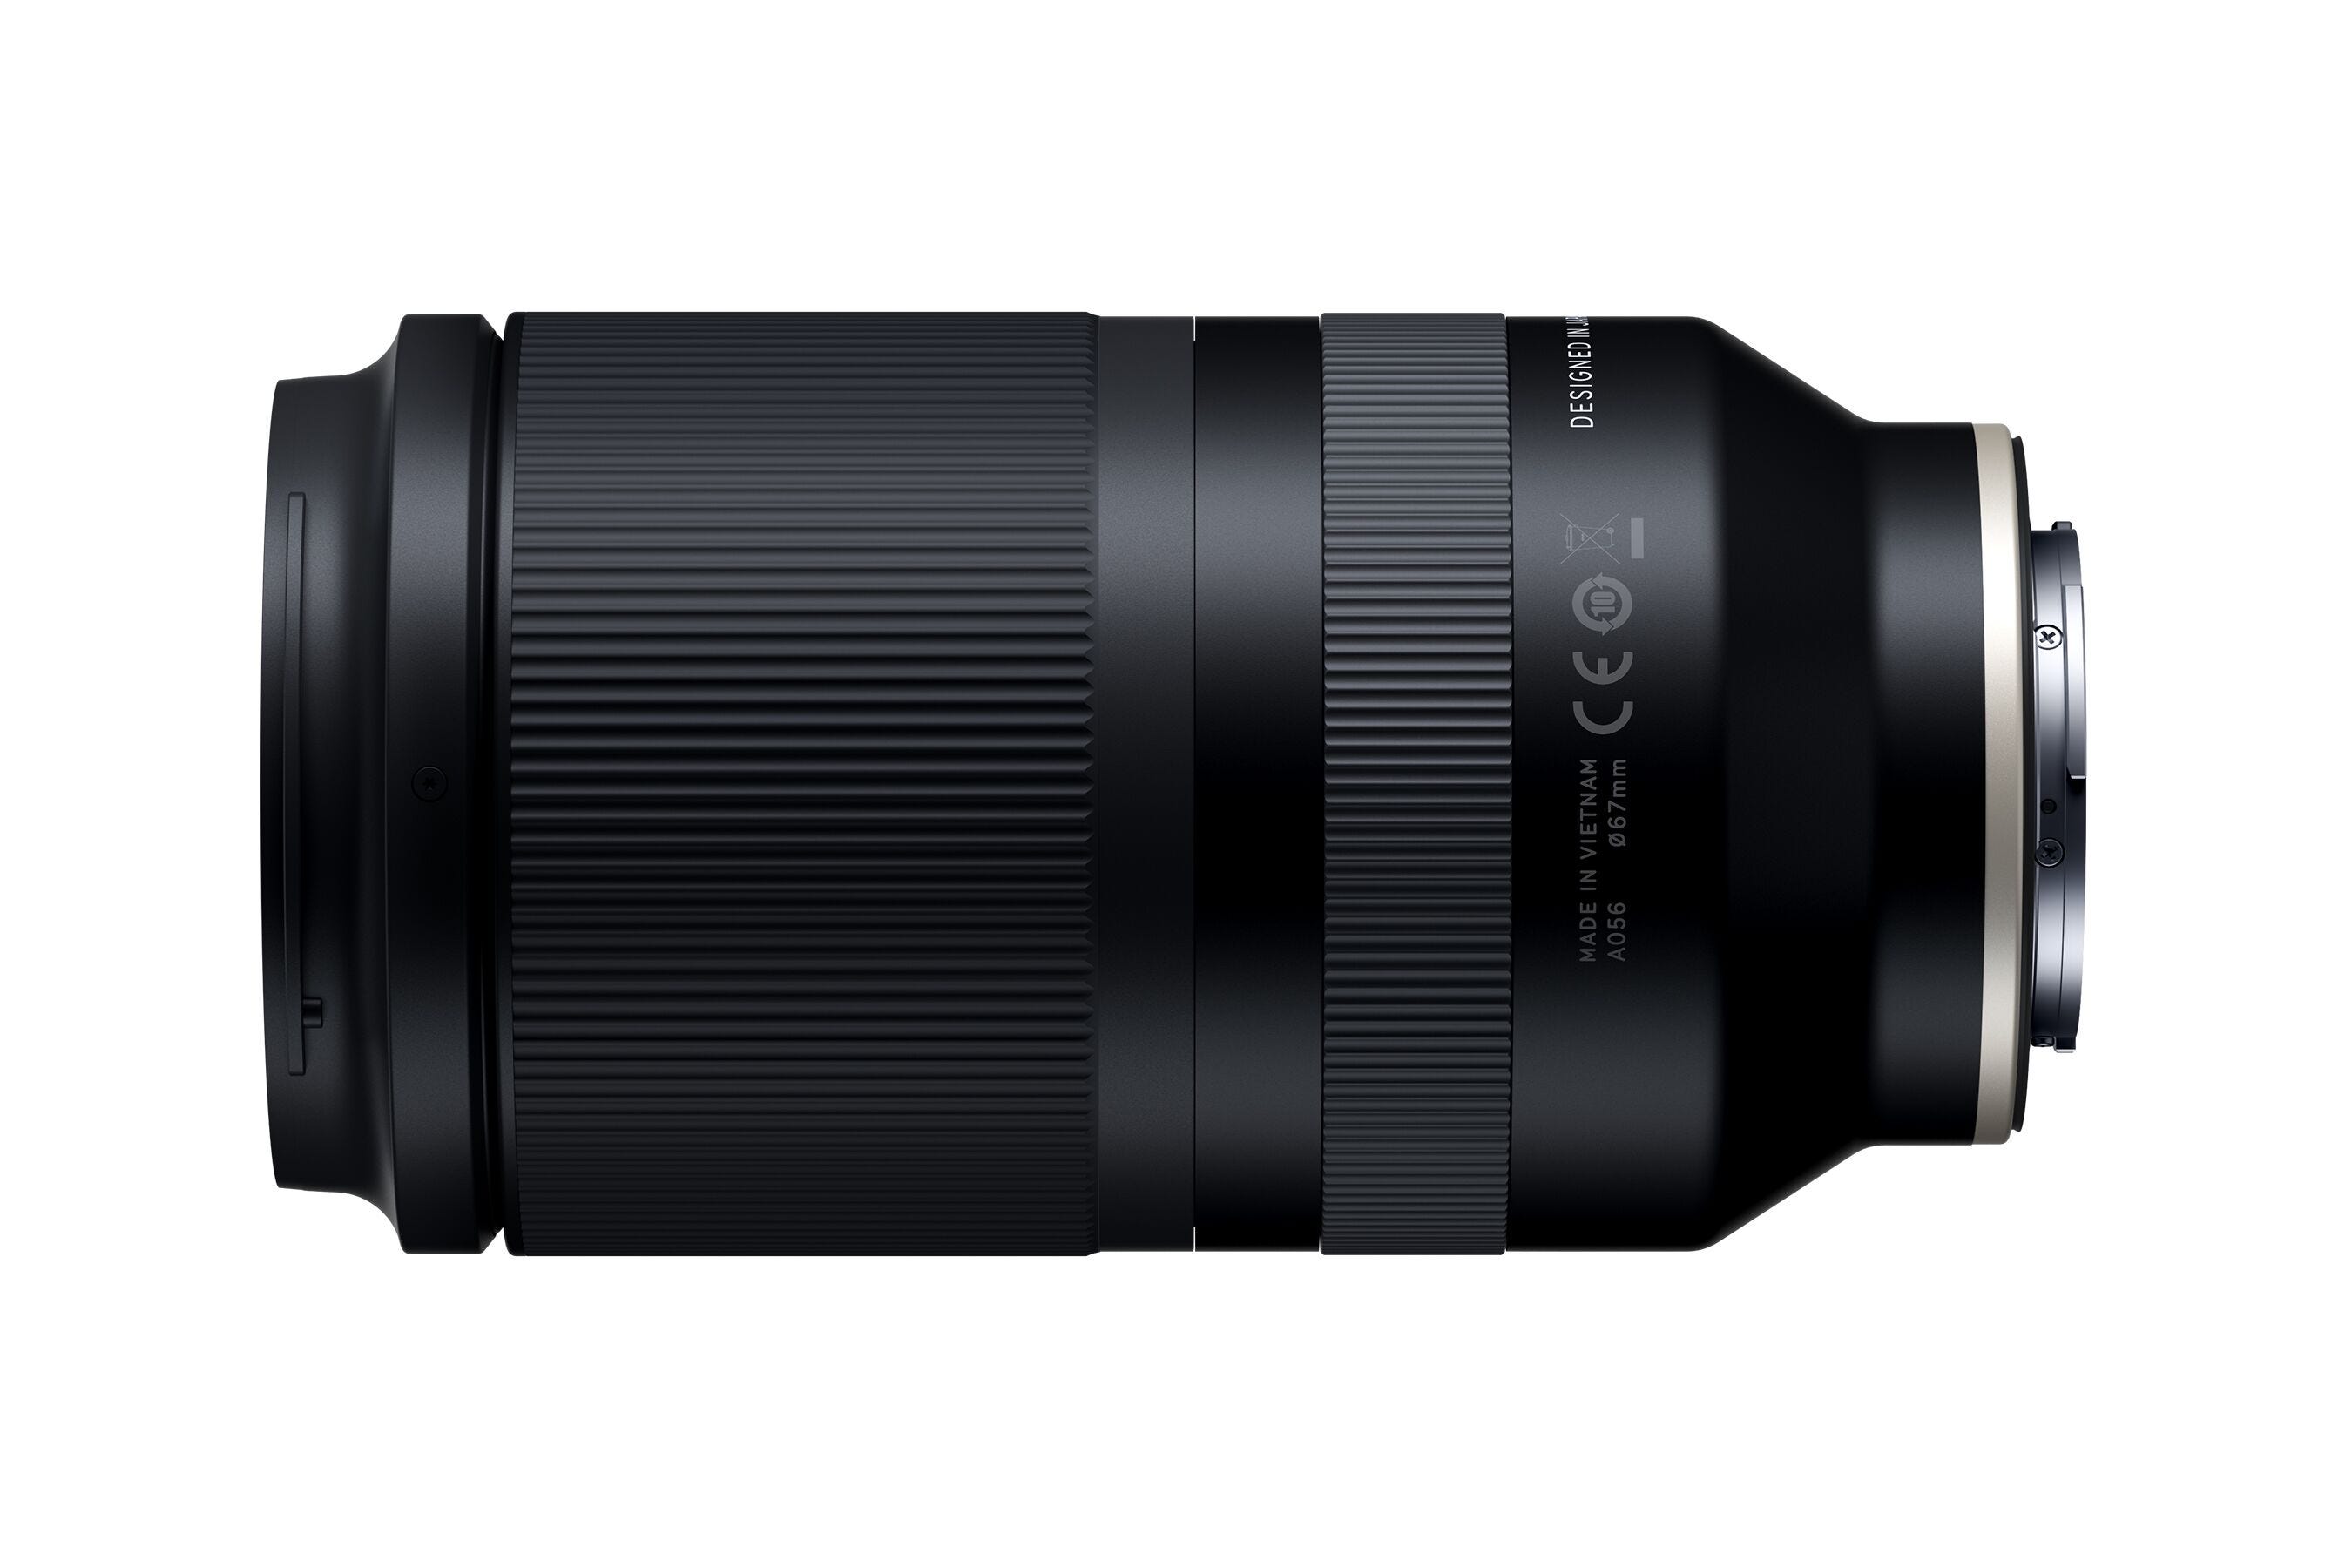 Tamron 70-180mm f/2.8 Di III VXD Lens for Sony E-Mount Mirrorless 